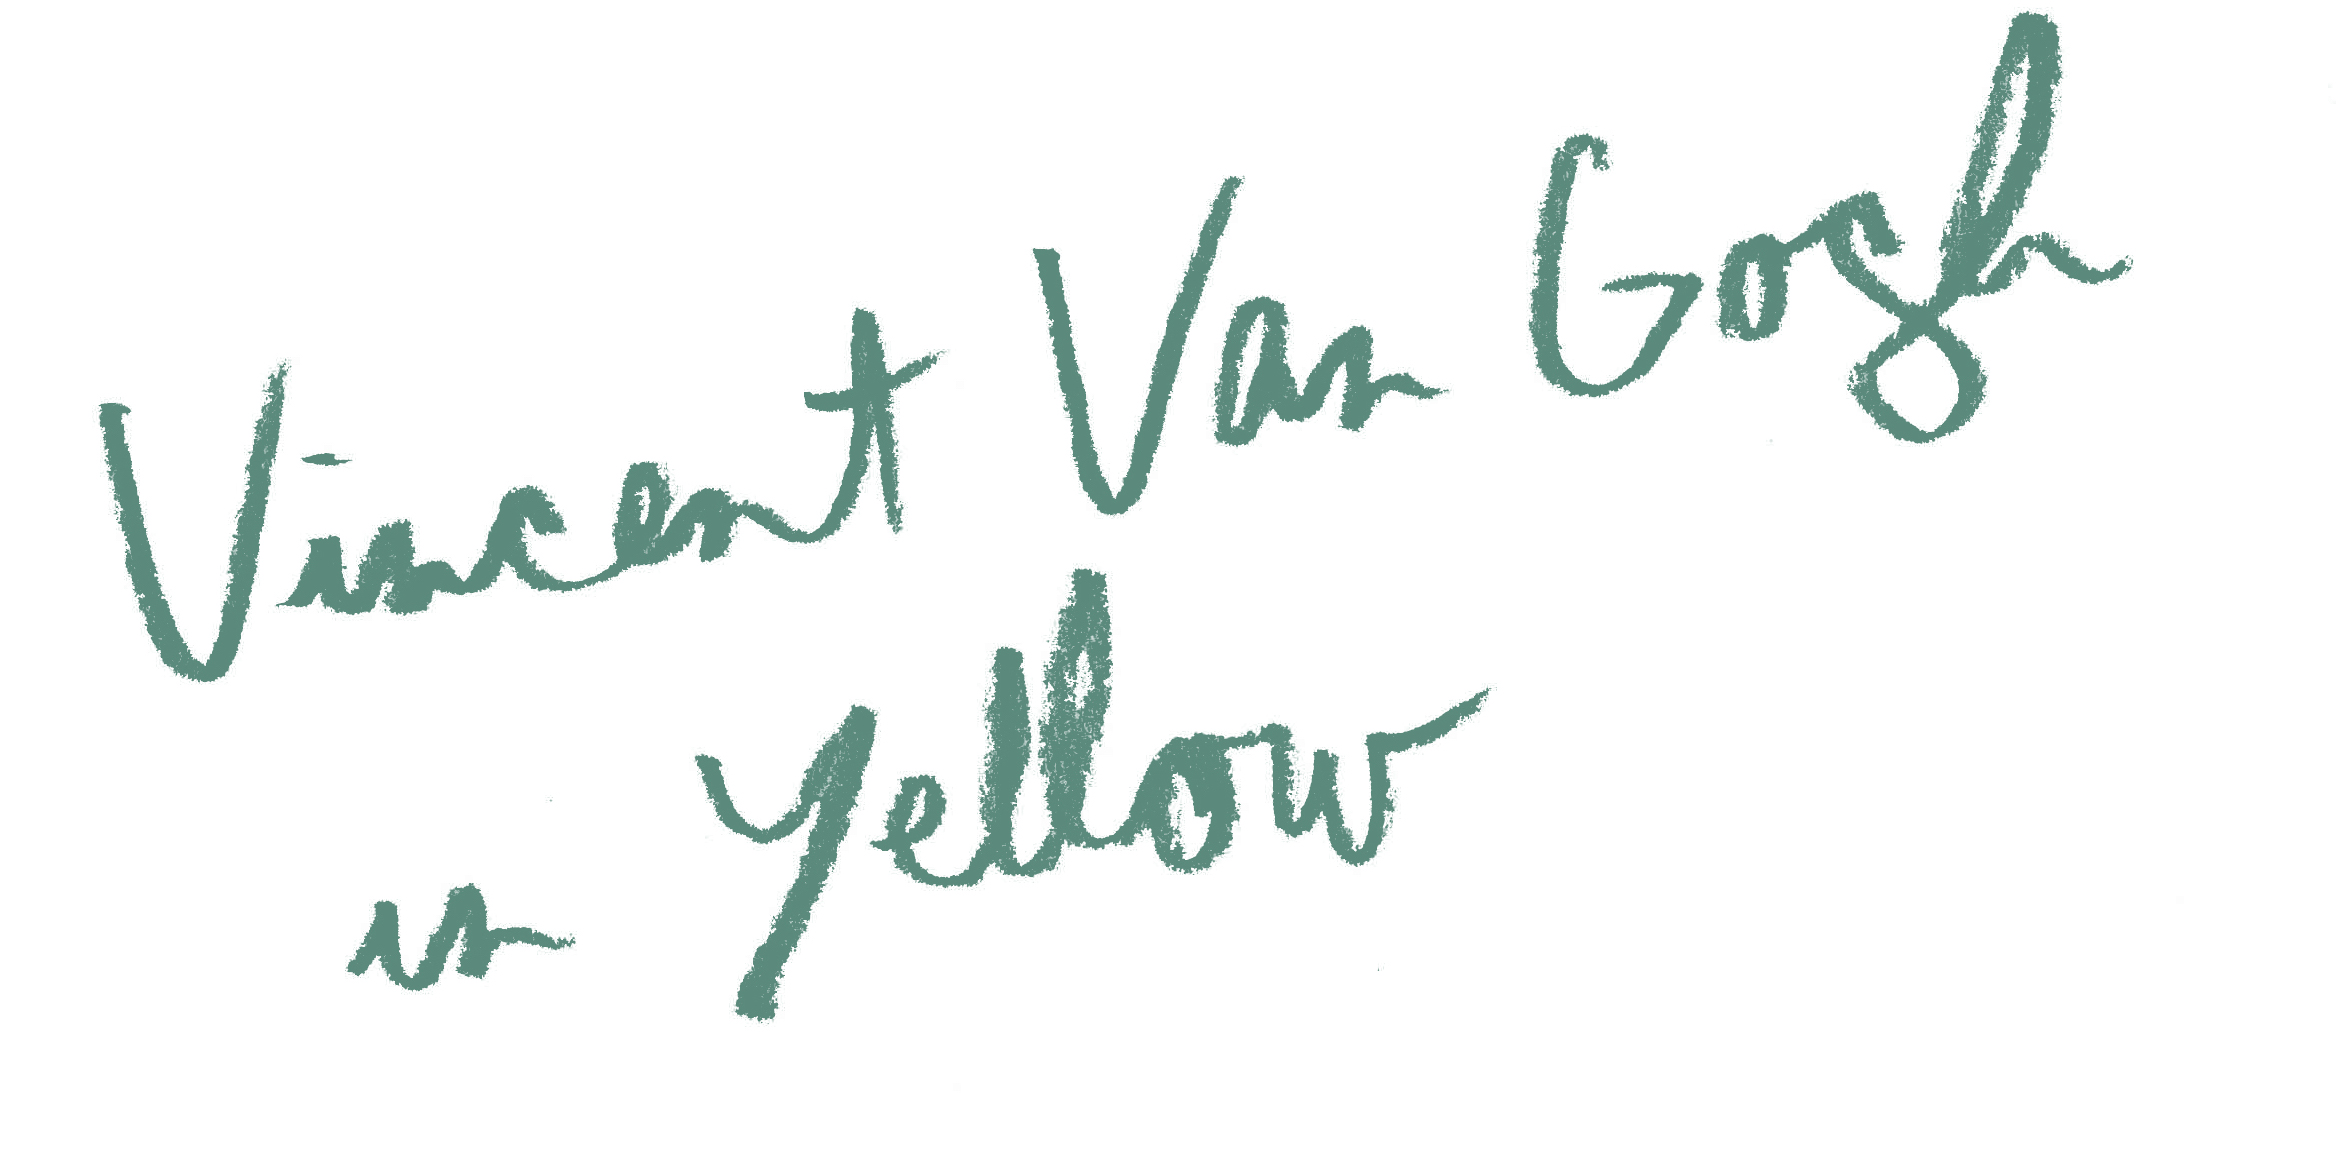 A portrait titled Vincent Van Gogh in Yellow by Artist Mathieu Laca